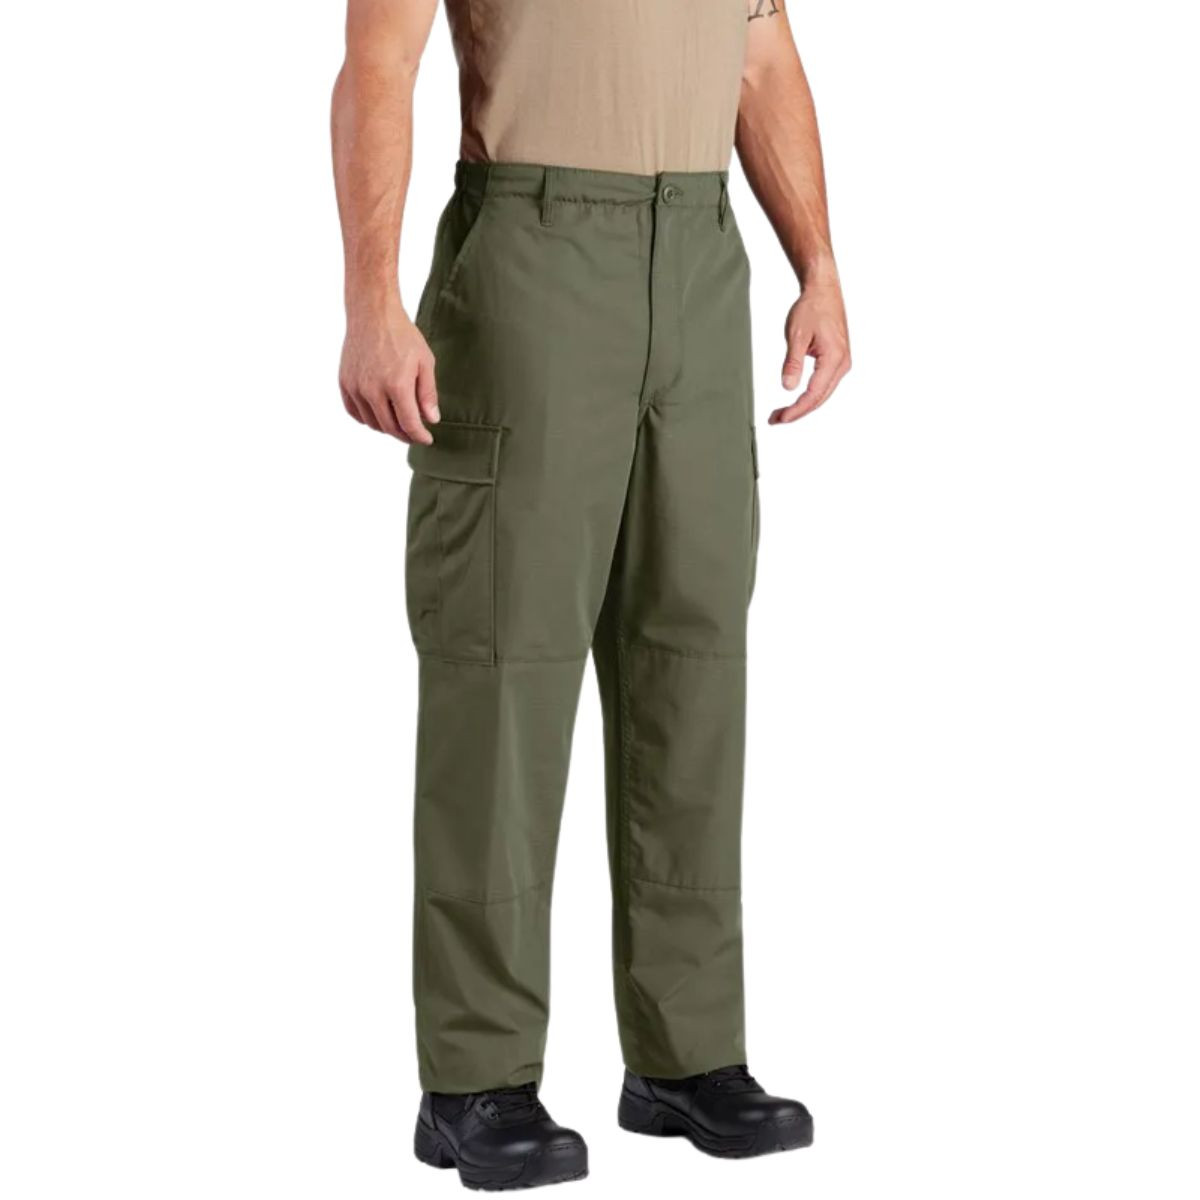 Image of Military BDU Pant 100% Cotton Ripstop Button Fly